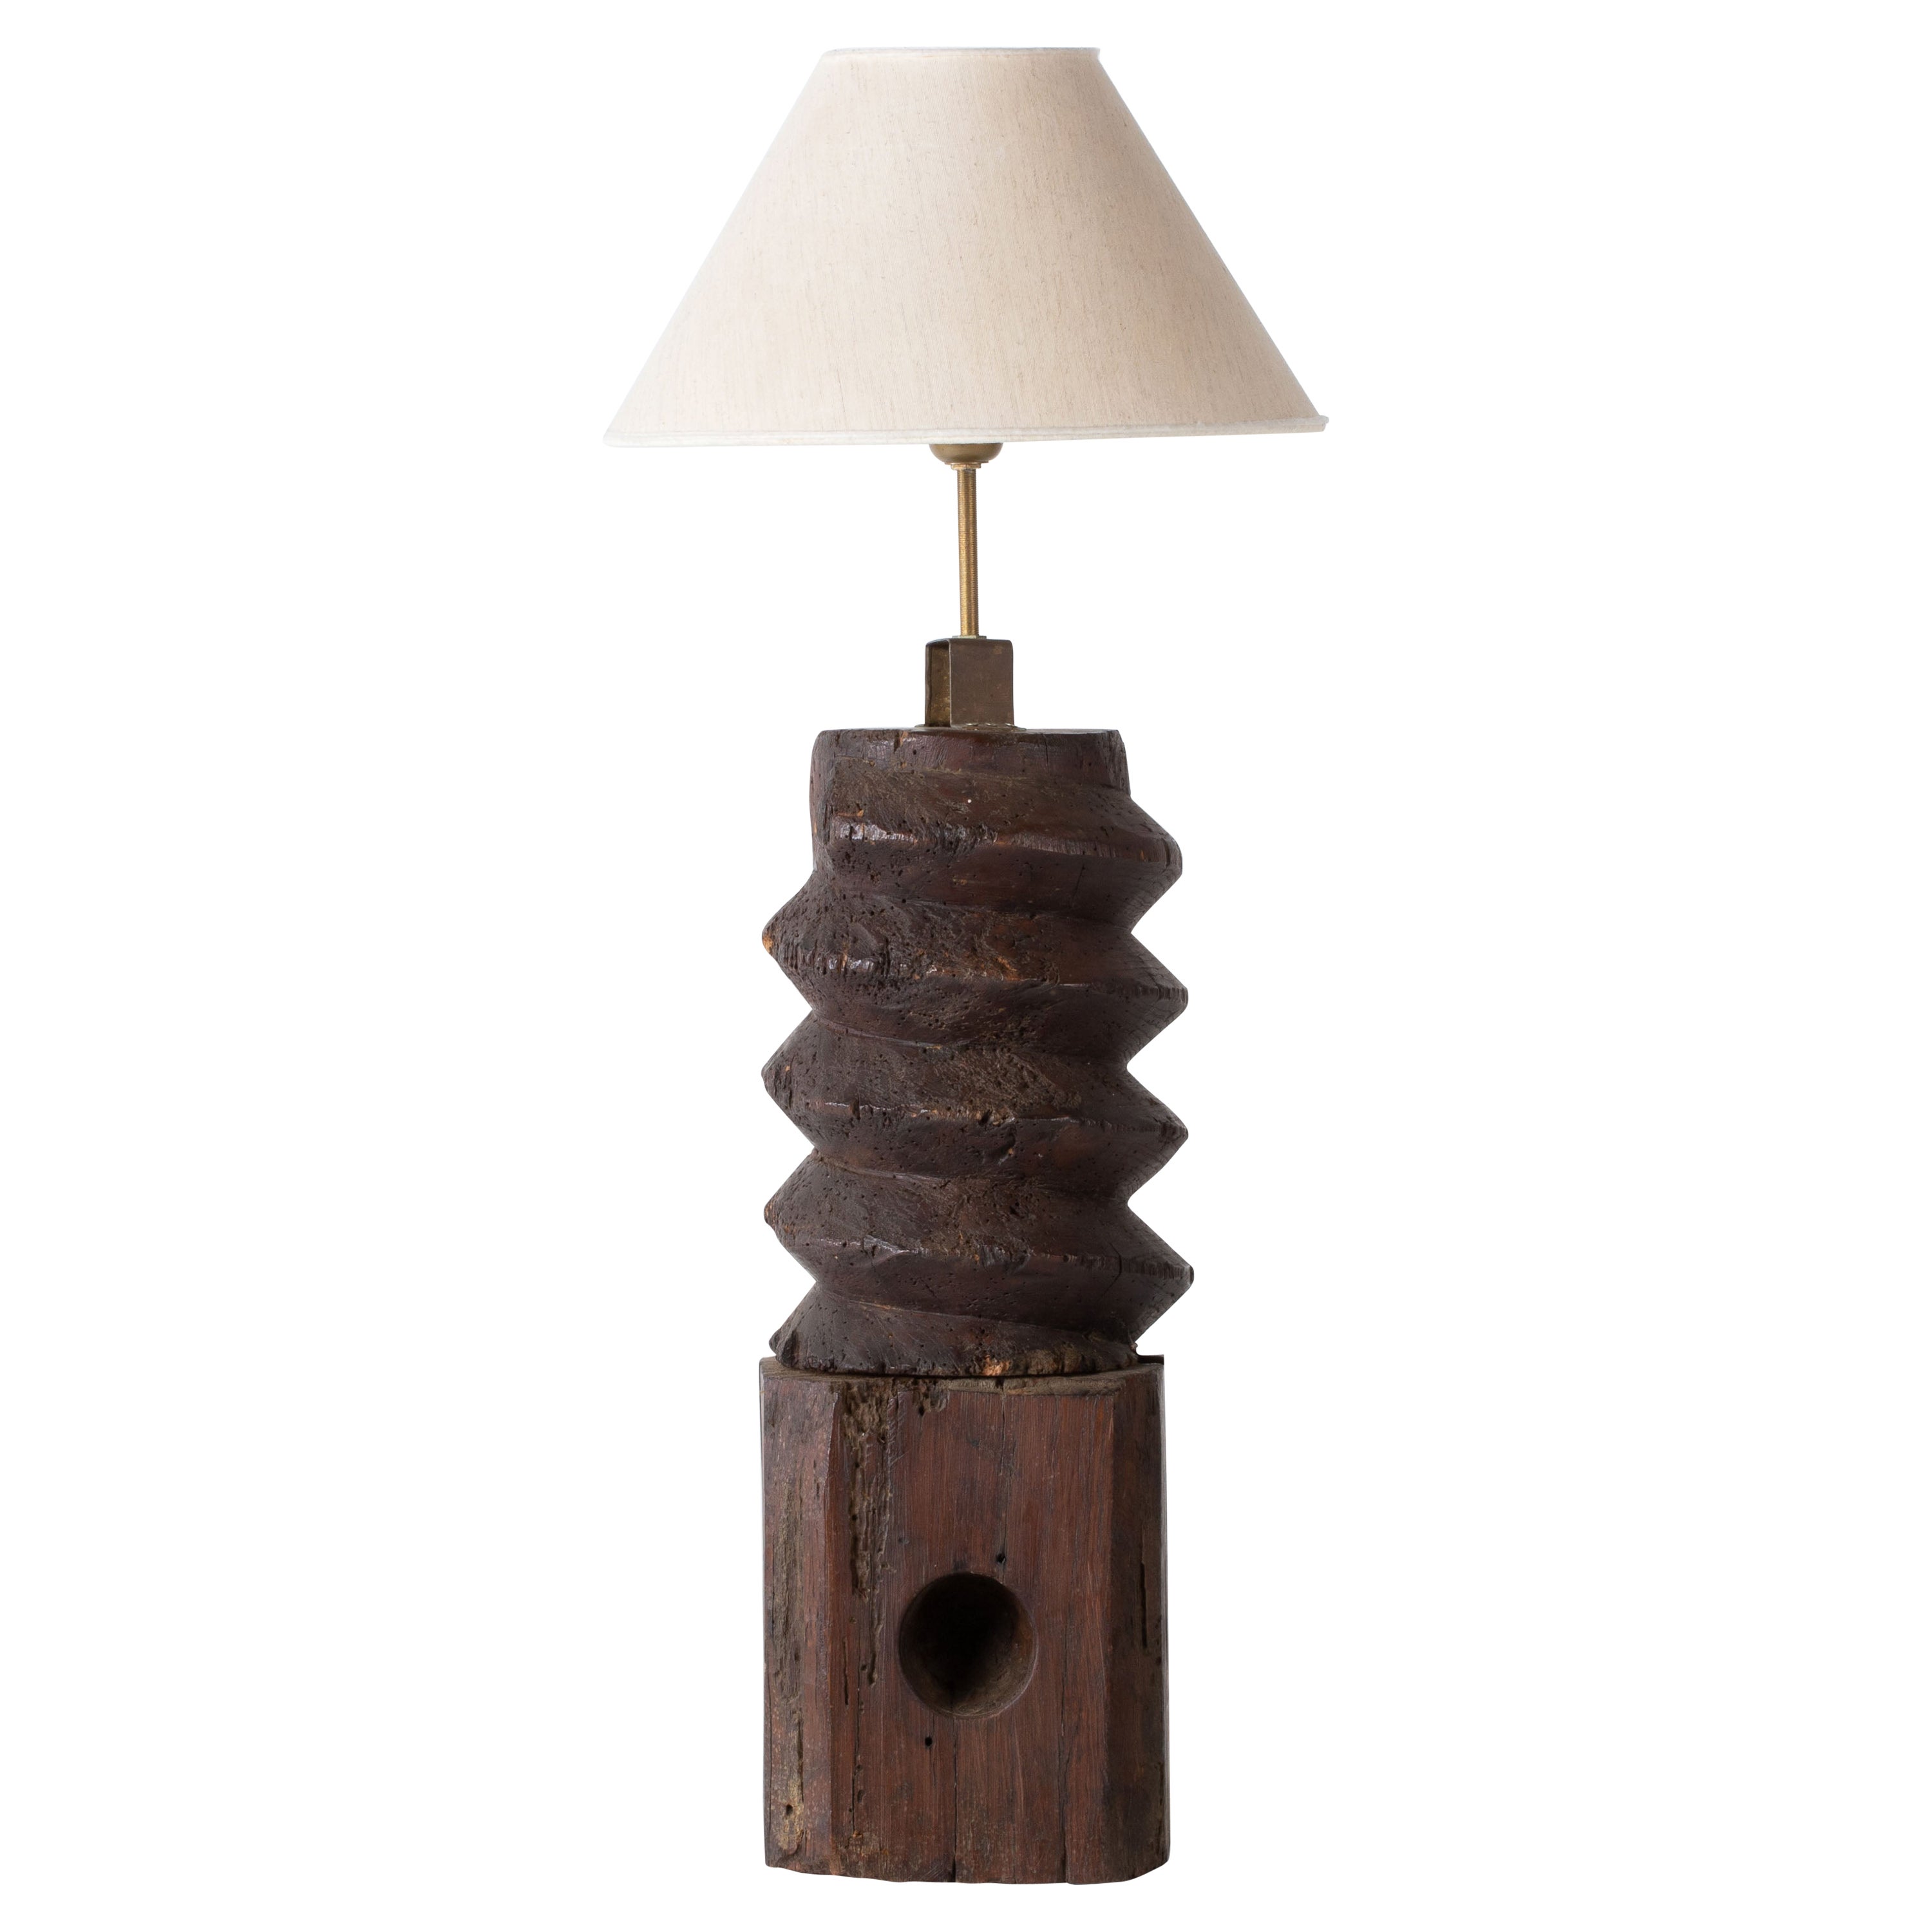 Authentic Brutalist Table Lamp in Oak, France, 1940 For Sale